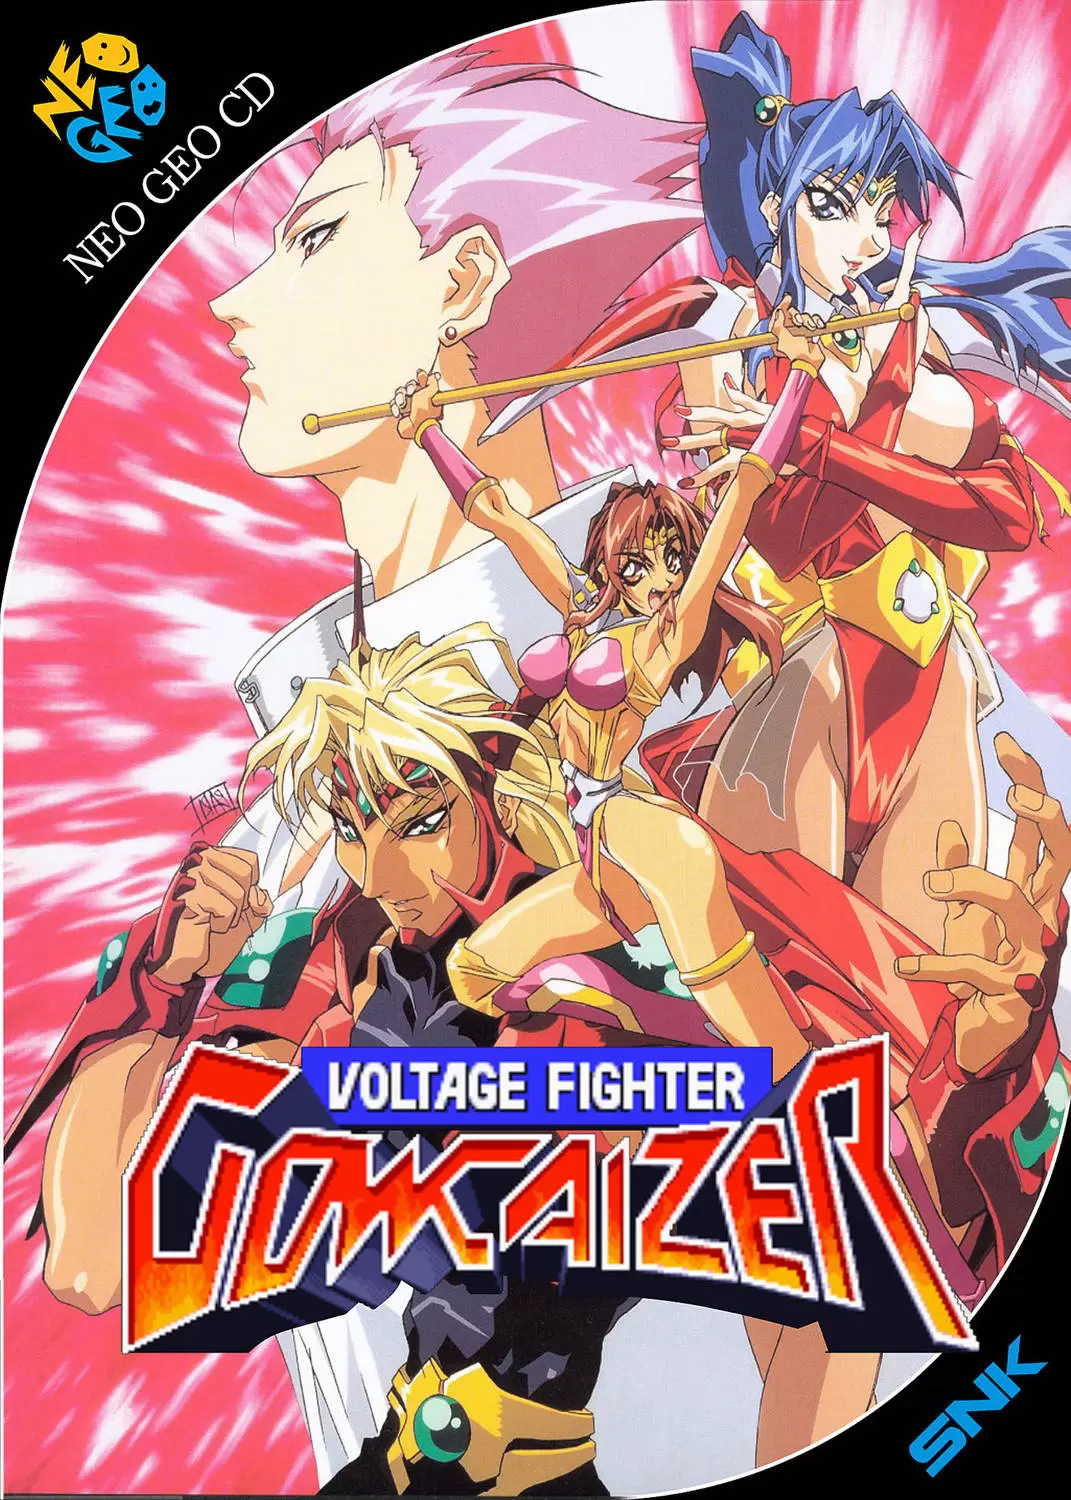 NEO-GEO AES - Voltage Fighter Gowcaizer